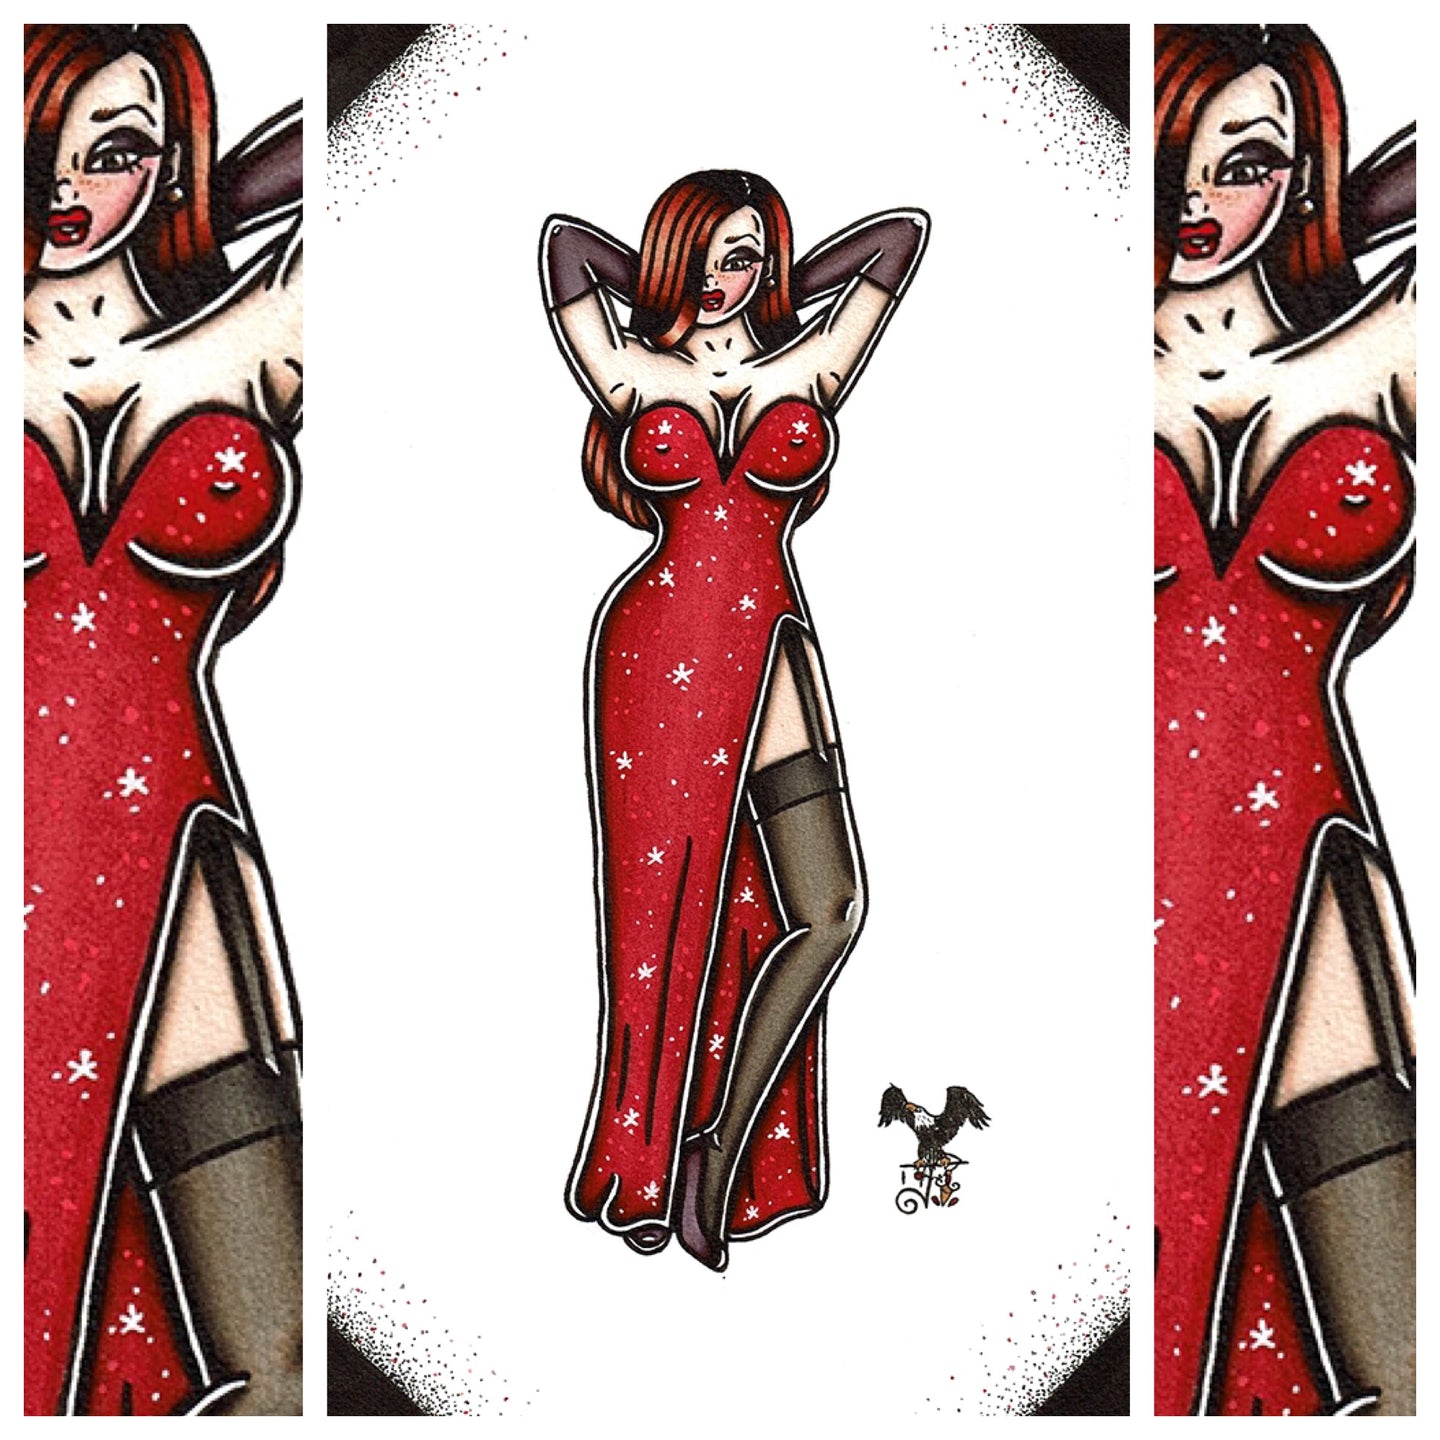 American Traditional tattoo flash Jessica Rabbit Pinup watercolor painting.